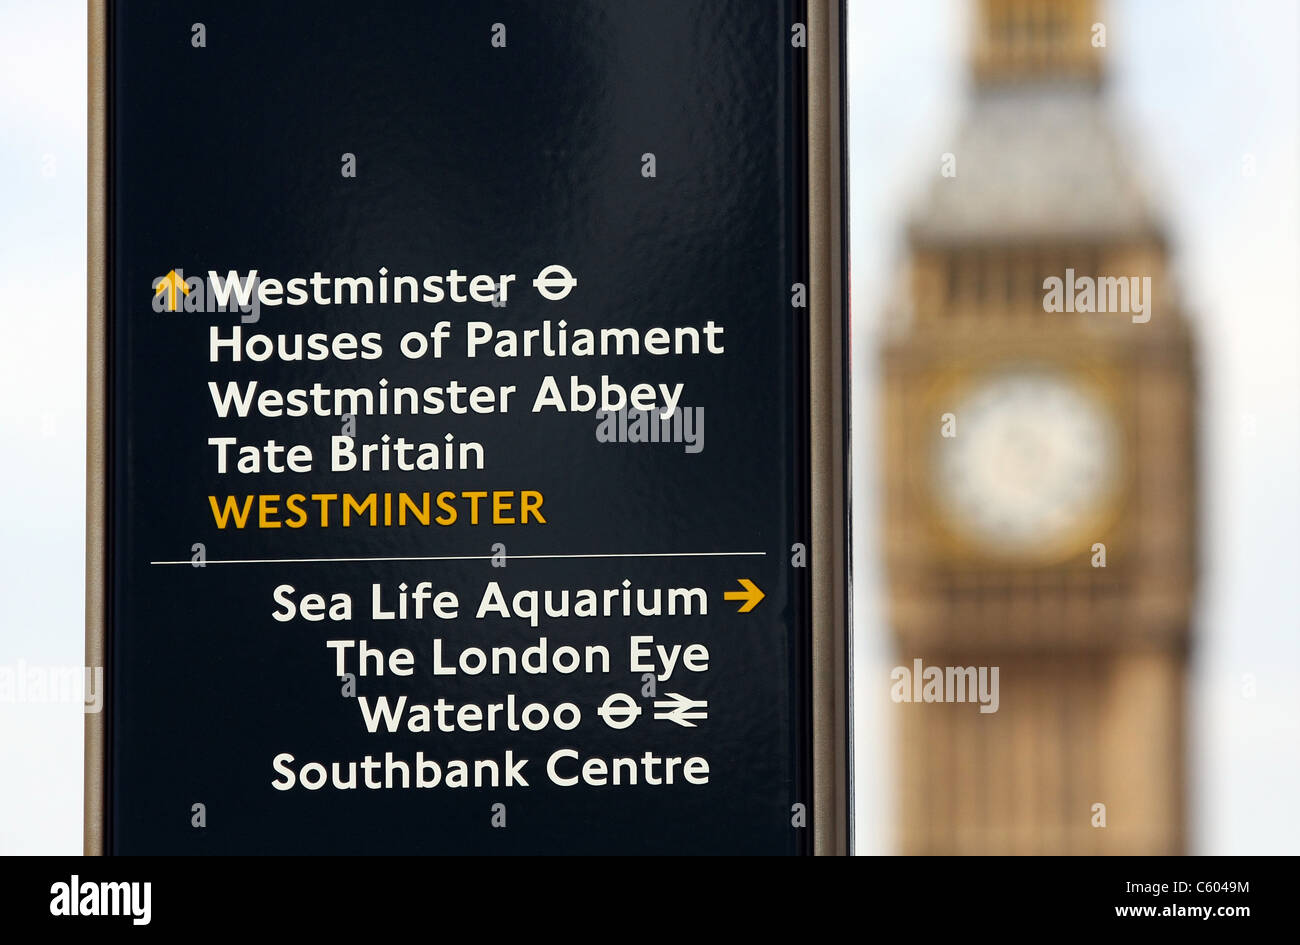 A sign showing places of interest with Big Ben in the background Stock Photo